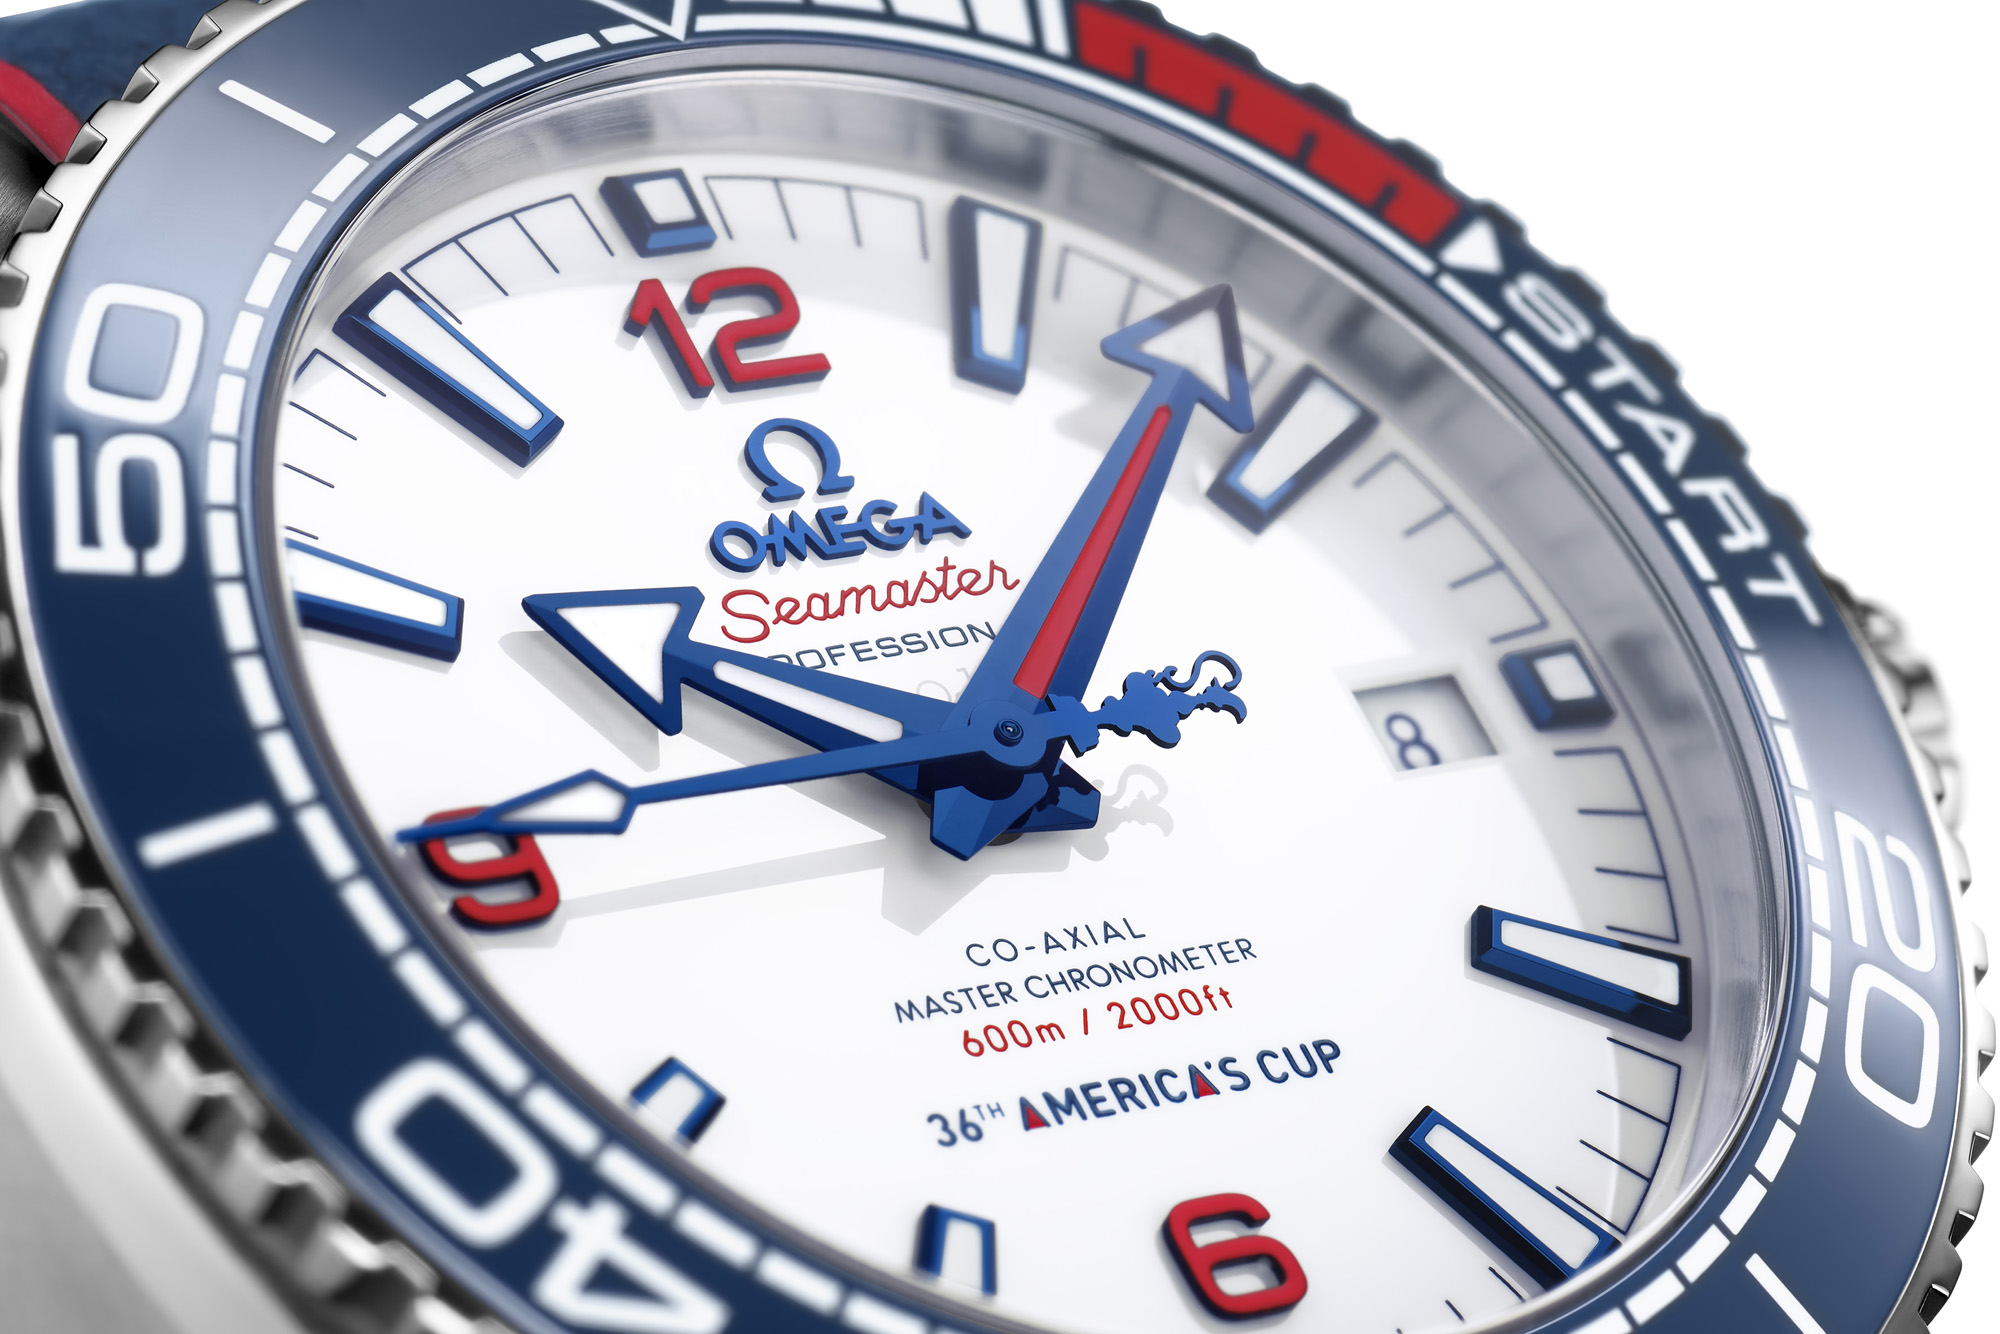 OMEGA Seamaster Planet Ocean 36th America's Cup Limited Edition